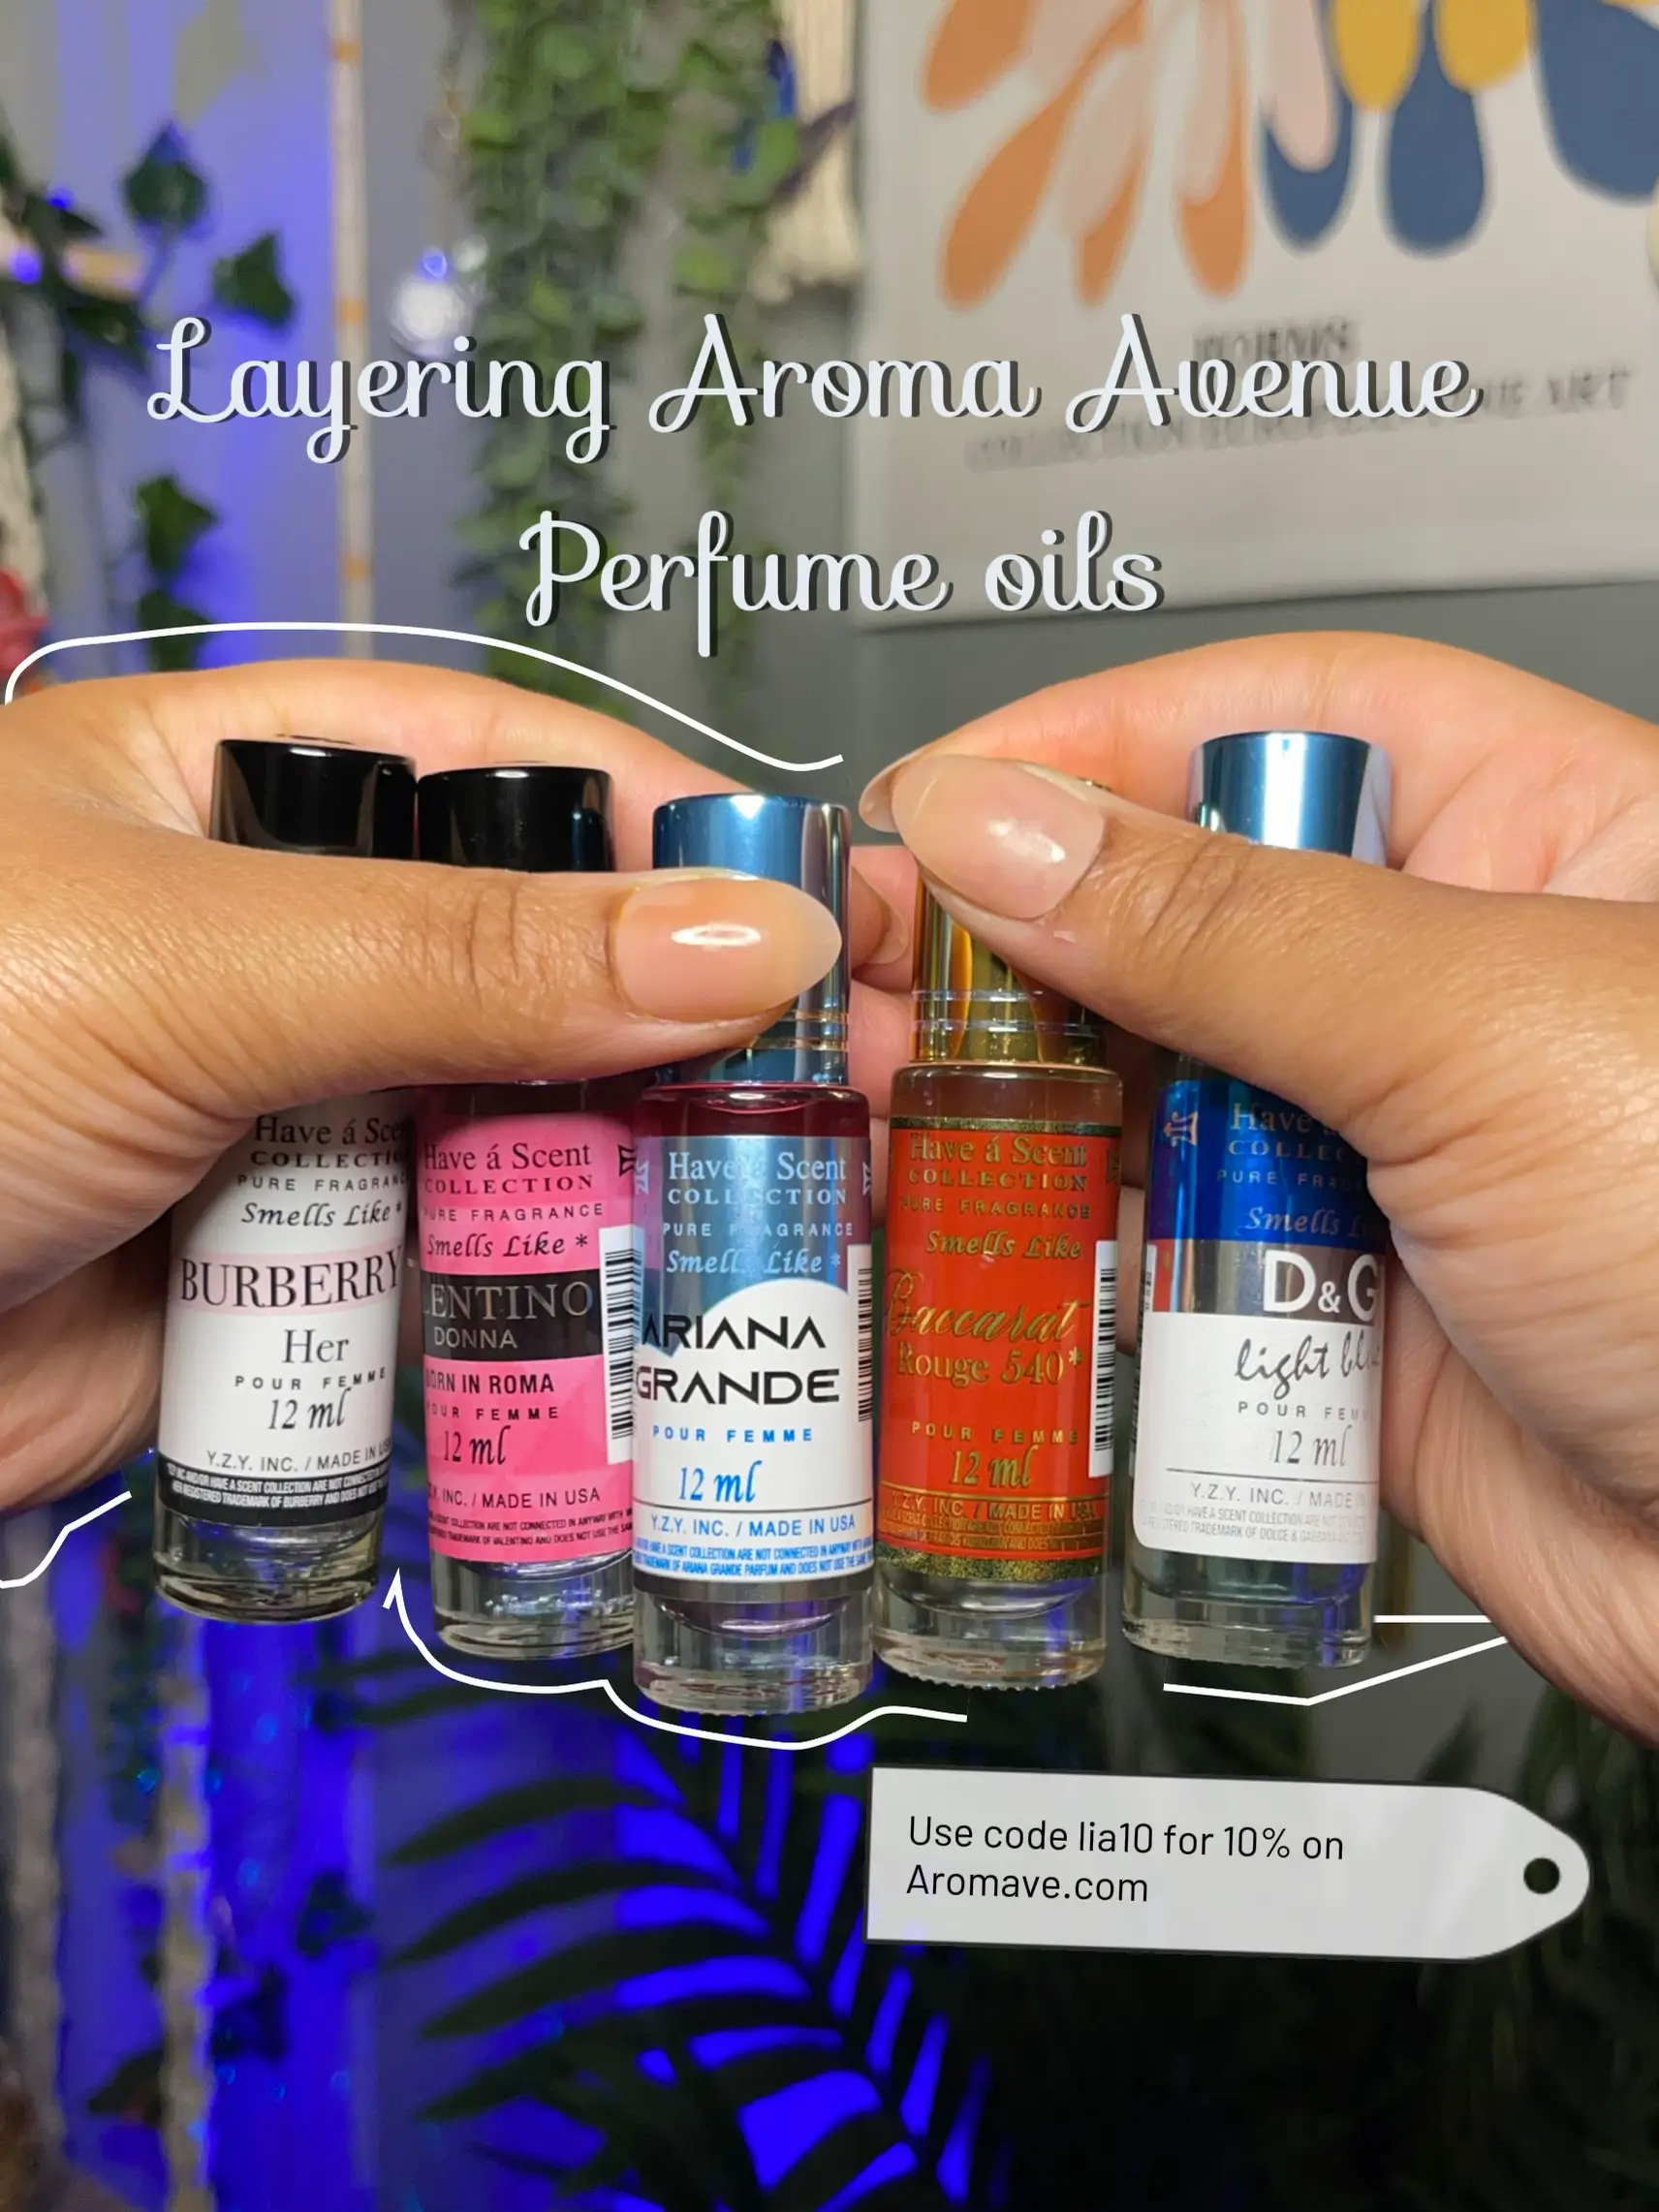 Layering Aroma Avenue Perfume oils, Gallery posted by Aaliyah